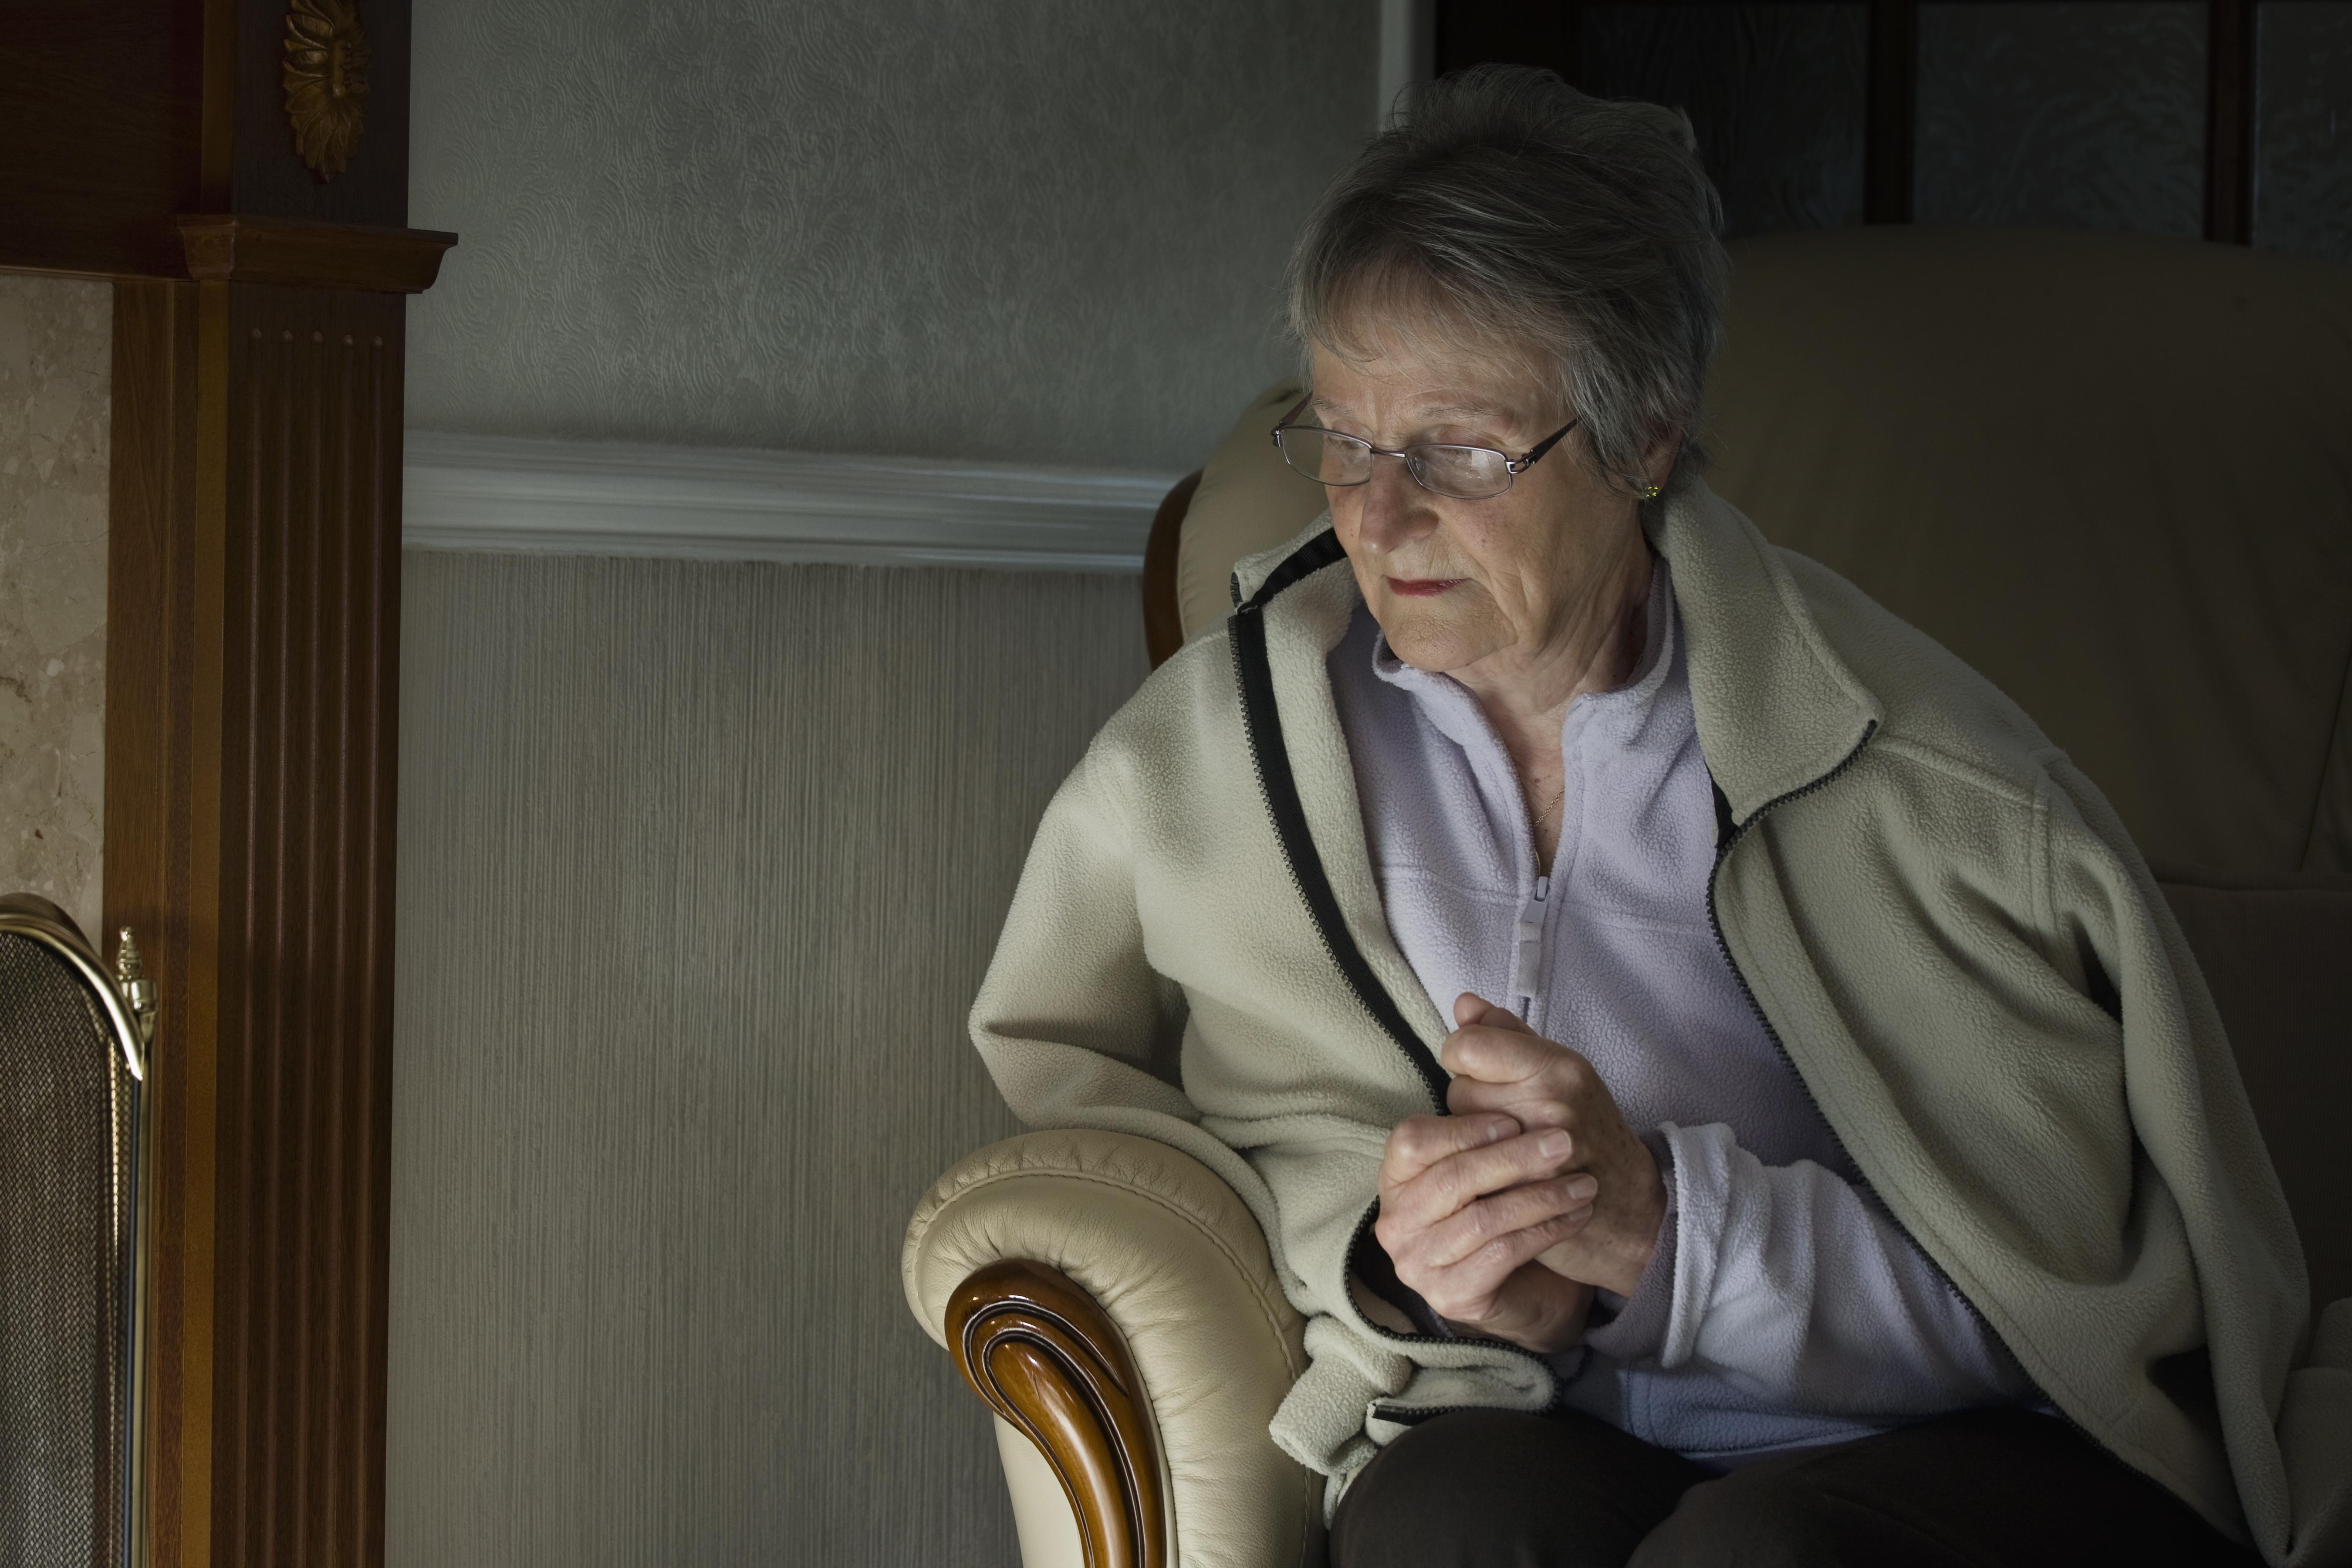 Elderly woman waring extra layers and looking cold